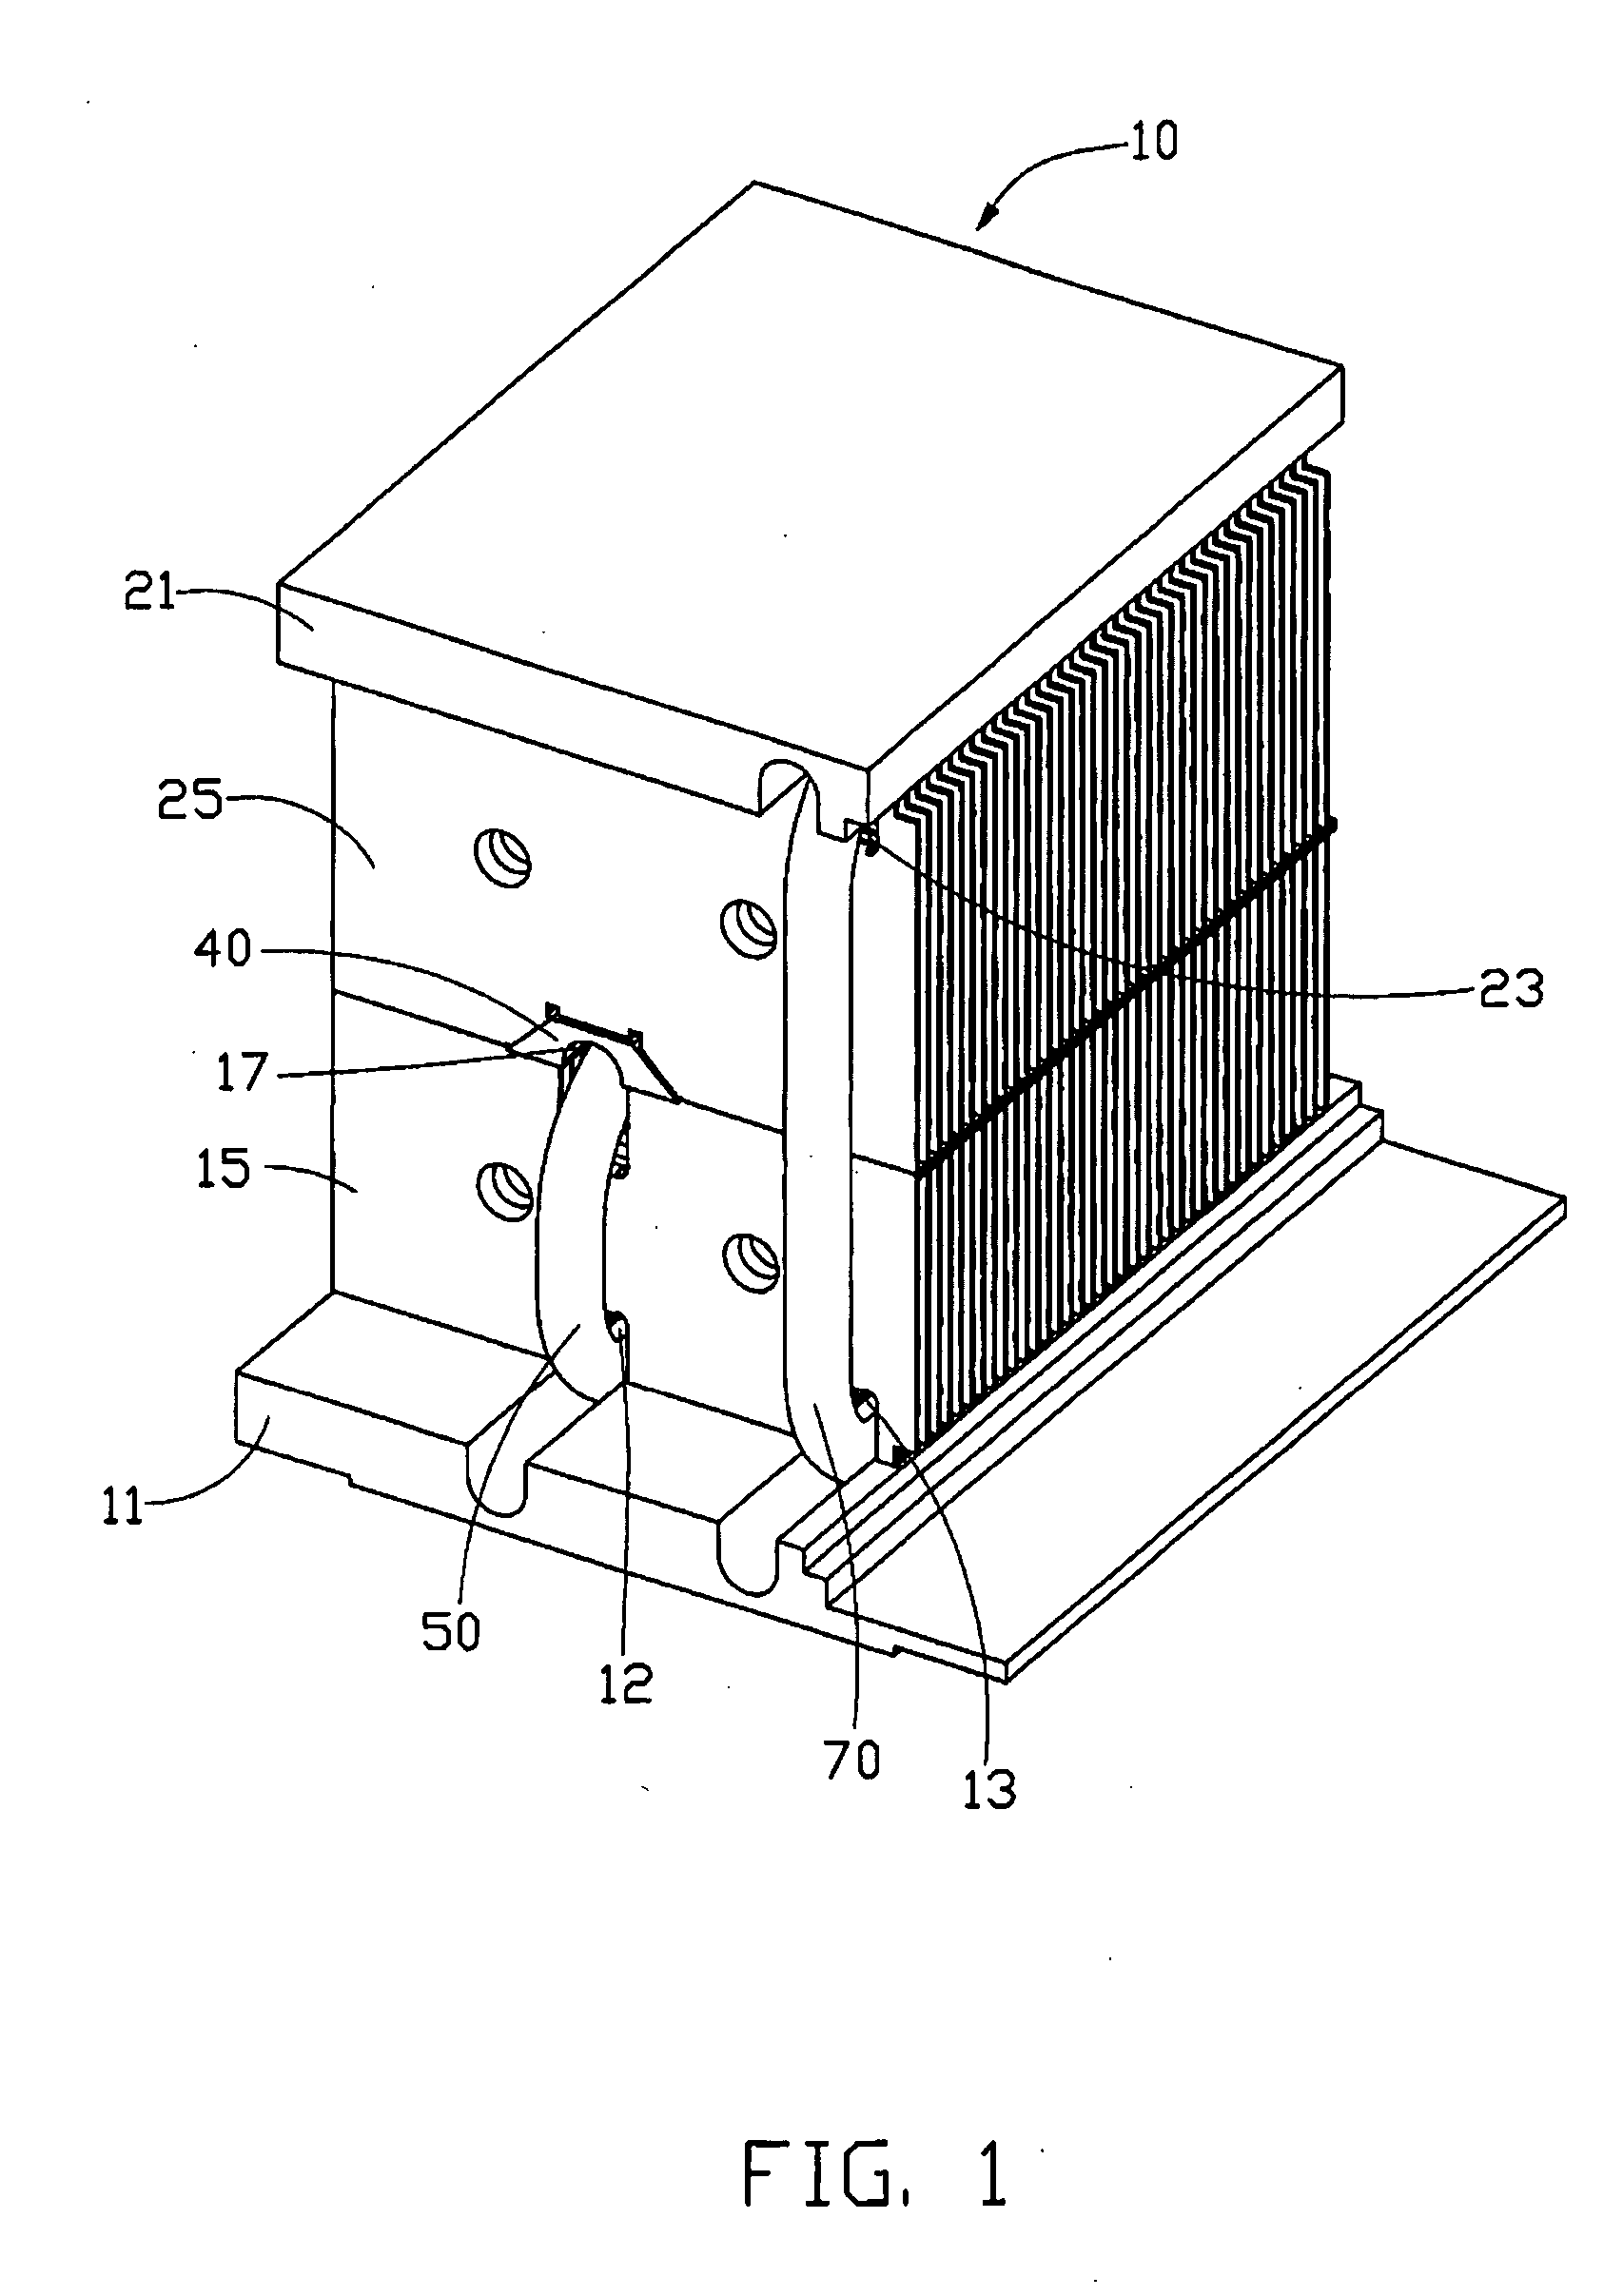 Heat dissipating device incorporating heat pipe